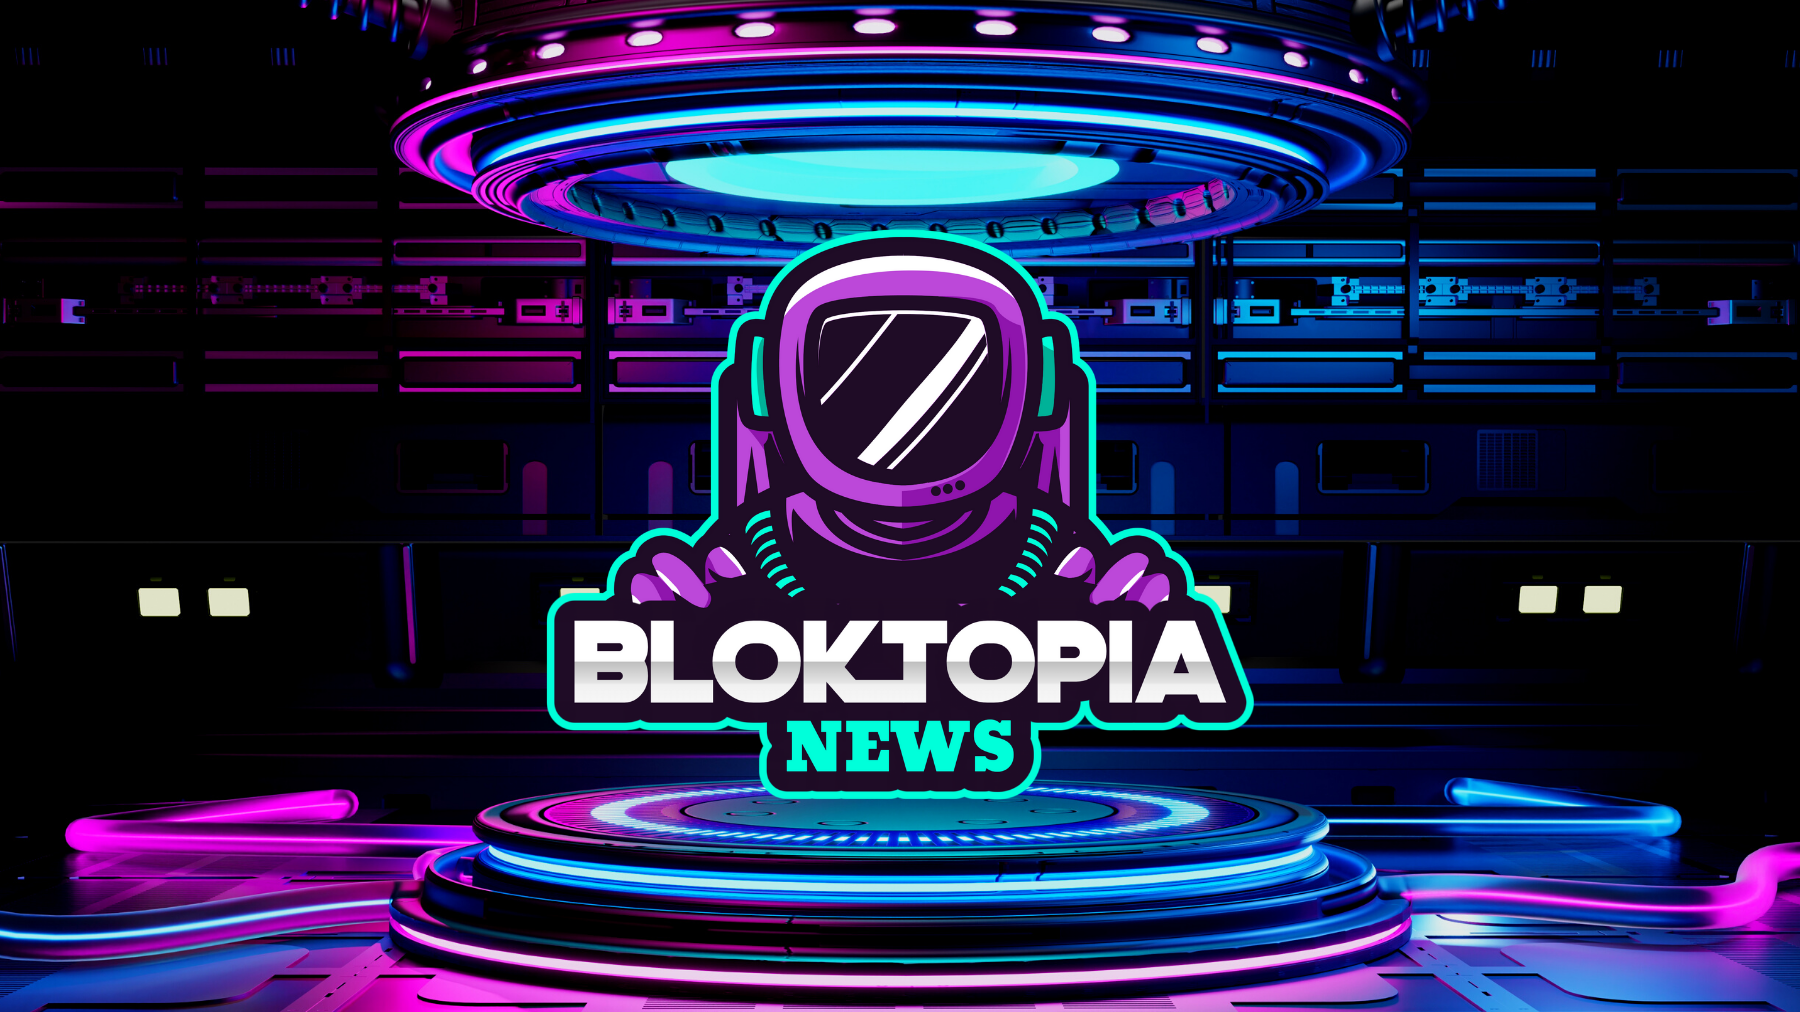 BLOK Metaverse Development News 2022 - How To Play, Invest & Earn On Bloktopia